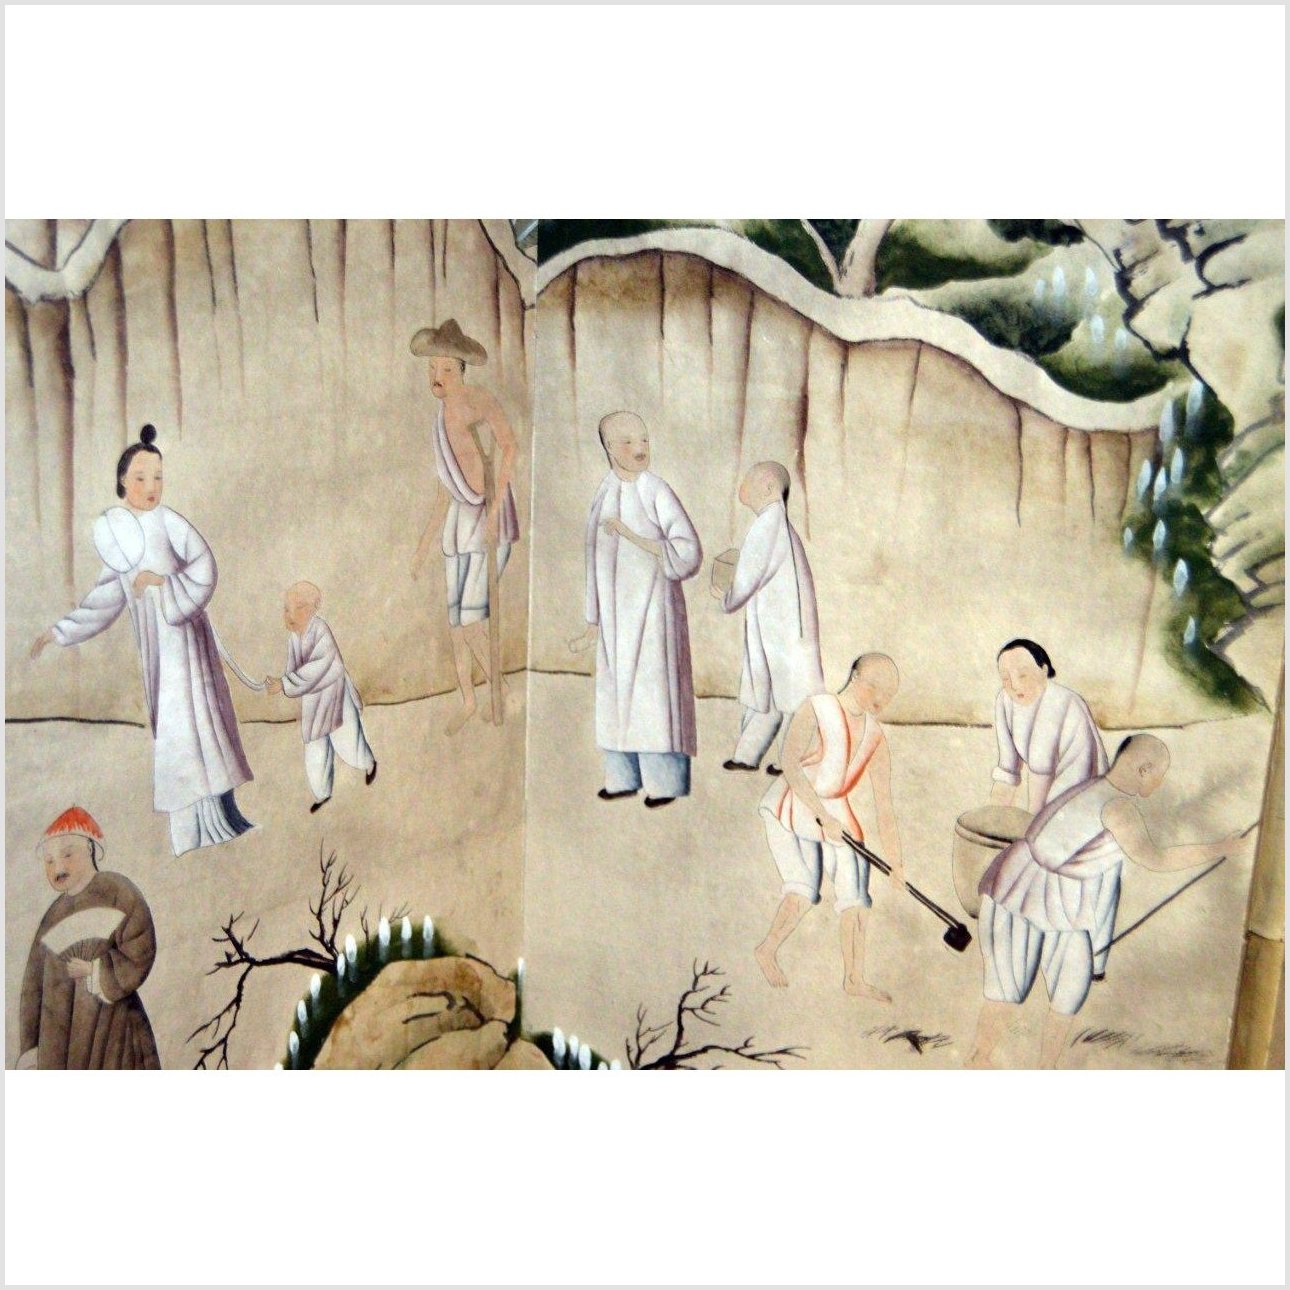 4-Panel Shan Shui Inspired Screen-YN2865-11. Asian & Chinese Furniture, Art, Antiques, Vintage Home Décor for sale at FEA Home